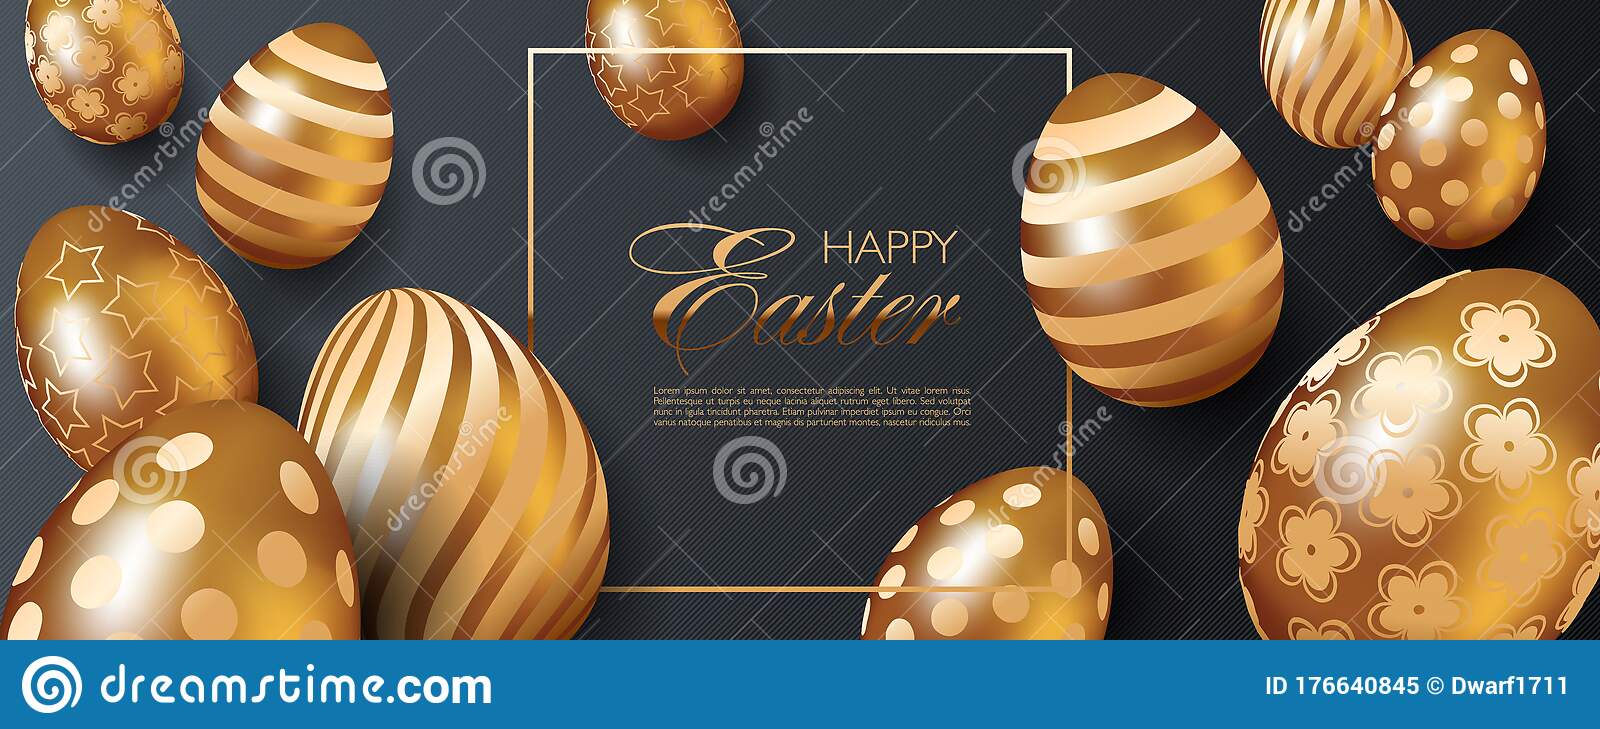 Luxury Happy Easter website header or banner template with realistic 3D golden eggs on black striped background 